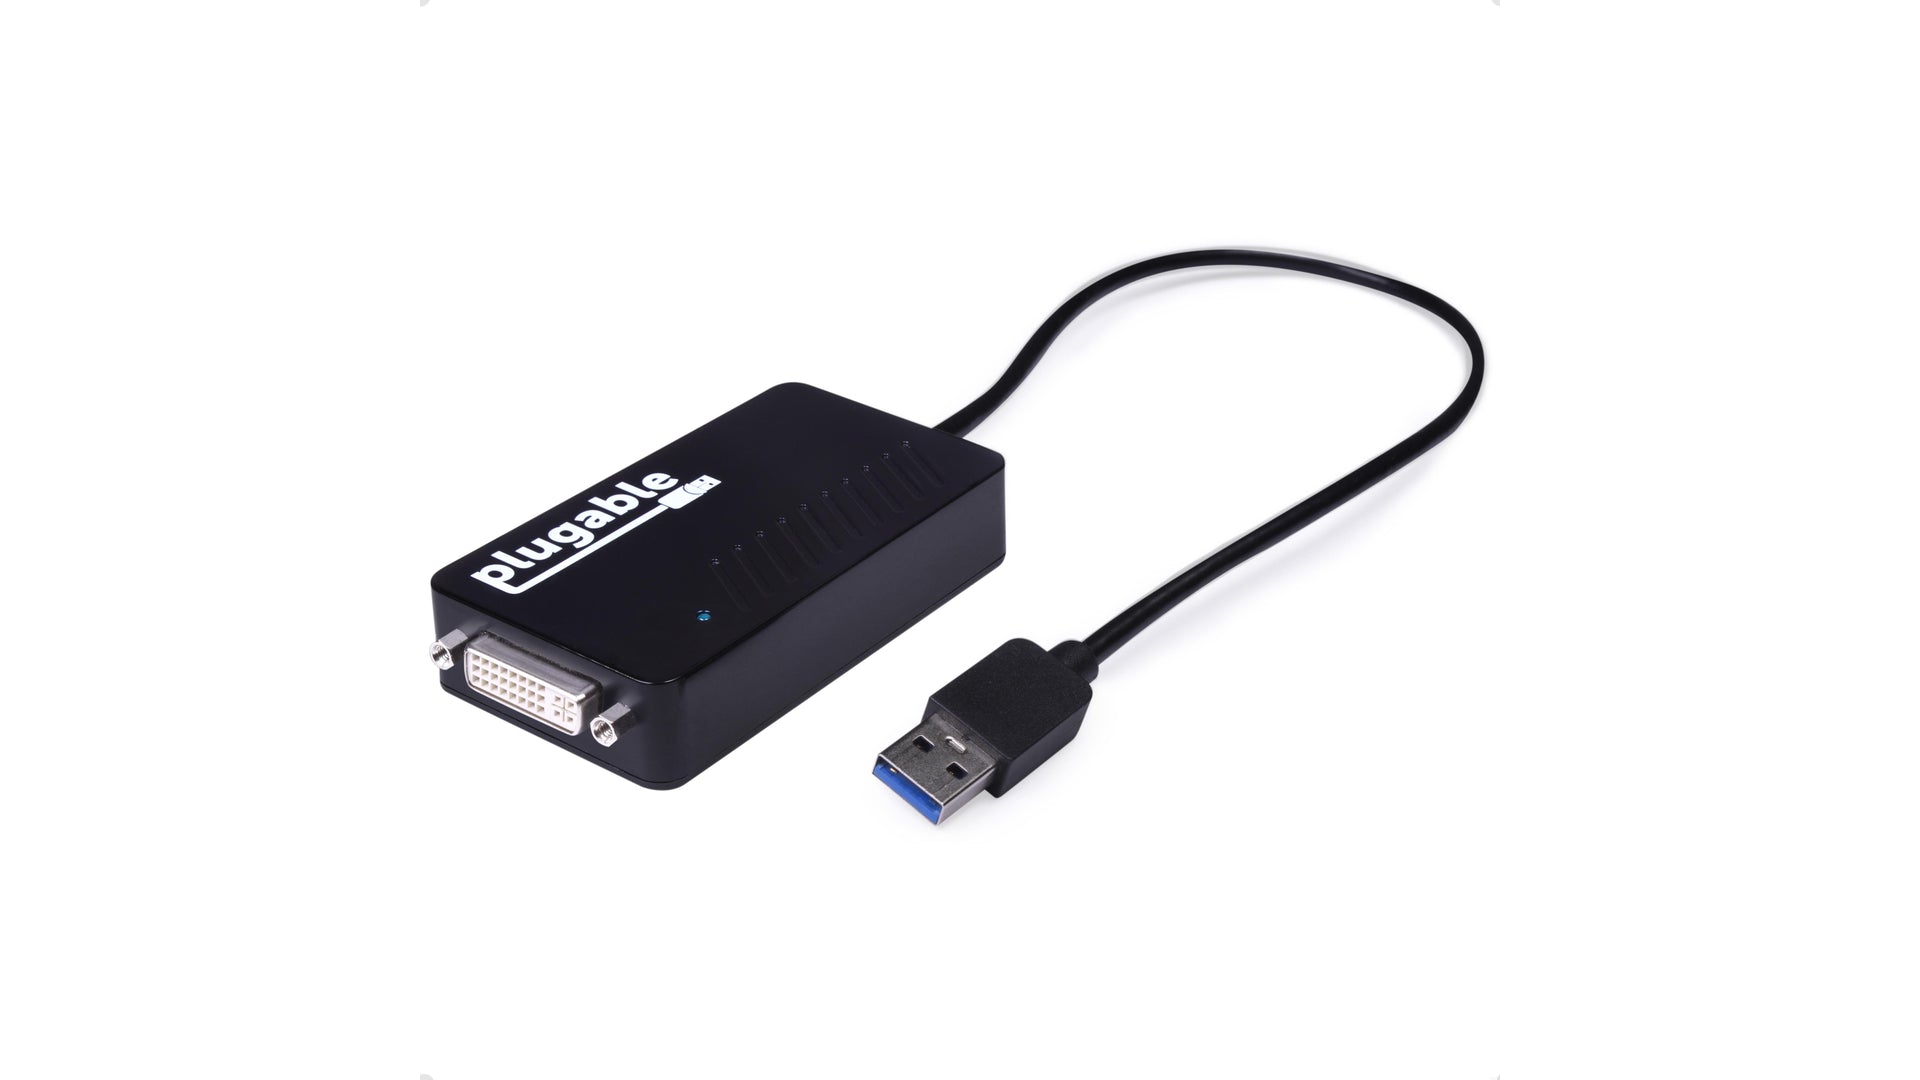  Video Adapter, USB Card Converter Plug and Play Easy to use for  Viewing Photos : Electronics